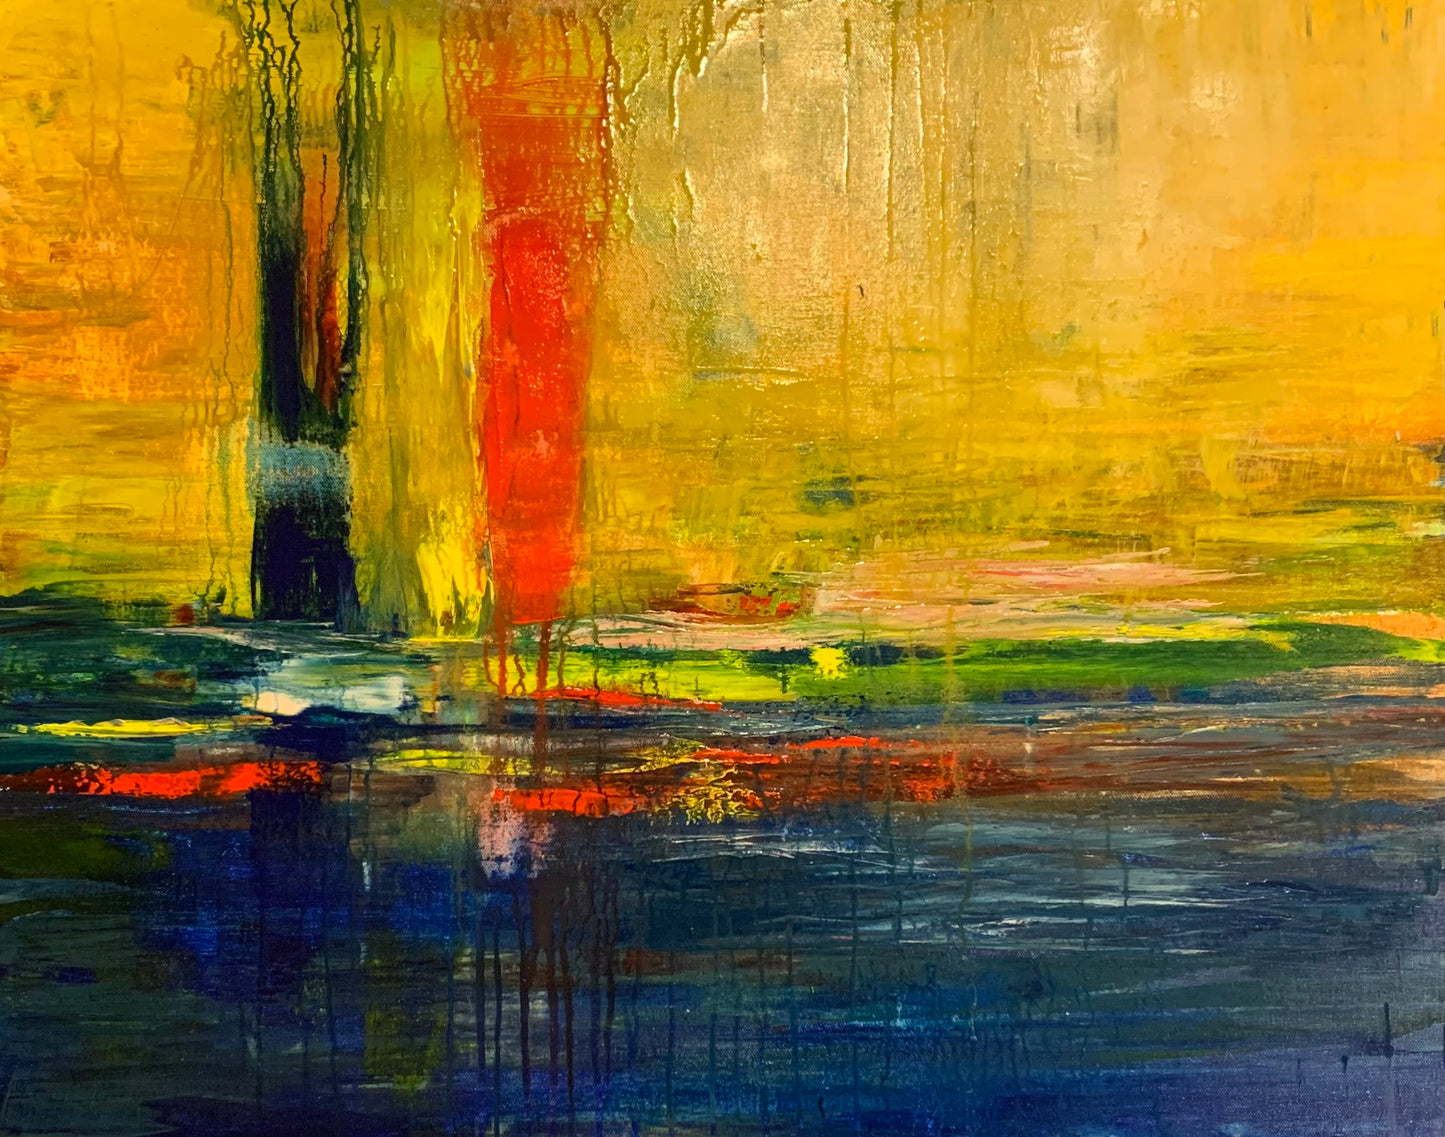 Abstract acrylic painting in tones of yellows and dark blues with touches of red.